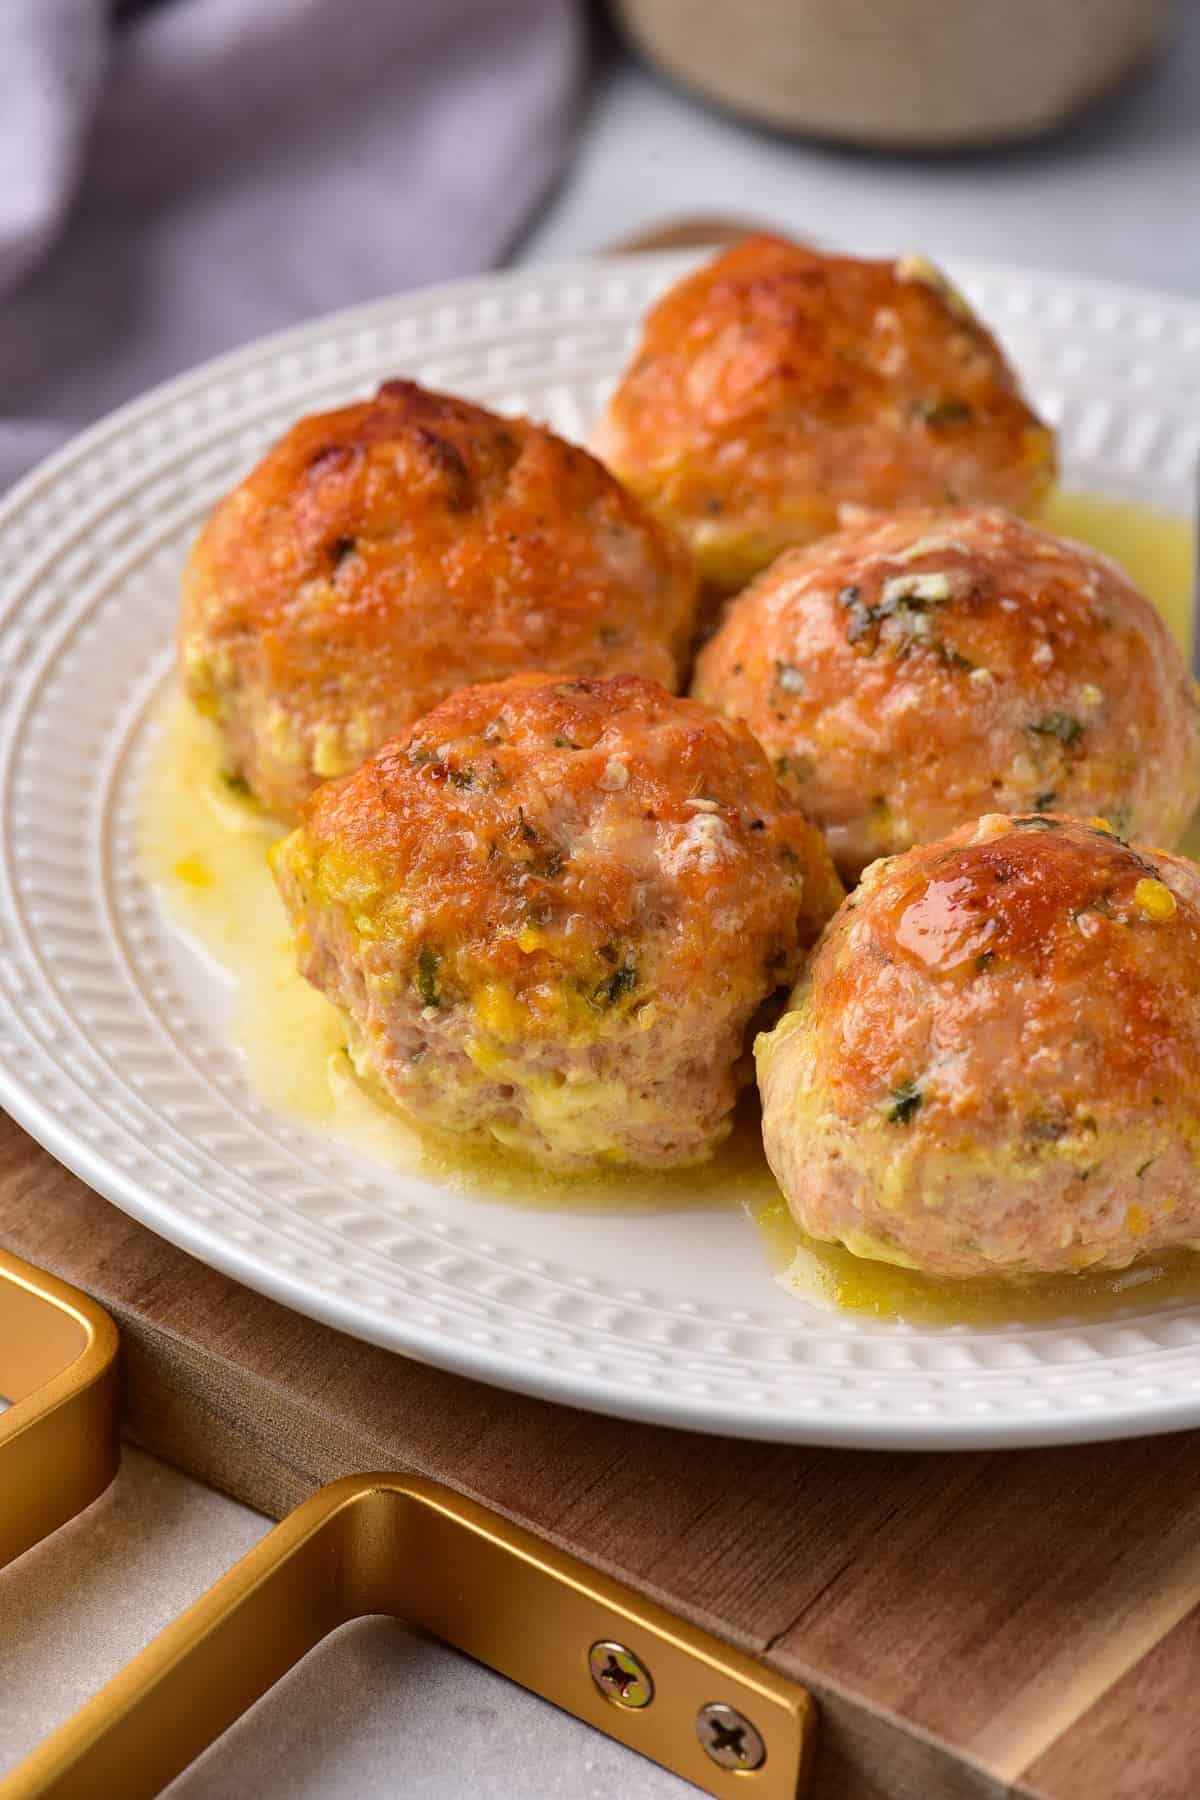 Plate of baked chicken meatballs with garlic butter.